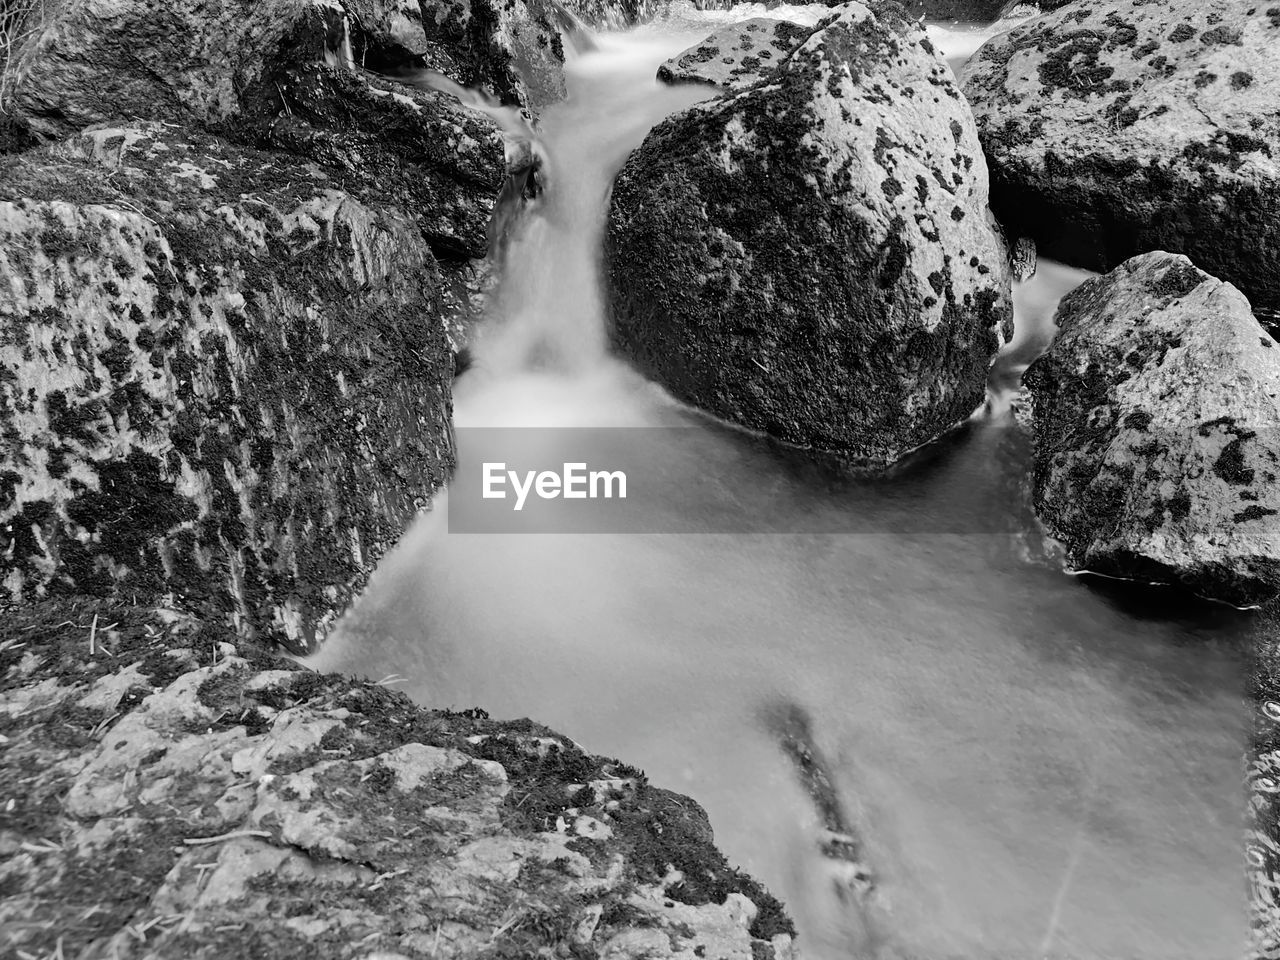 rock, water, black and white, nature, beauty in nature, waterfall, monochrome photography, scenics - nature, no people, monochrome, motion, land, stream, day, high angle view, environment, outdoors, river, rock formation, long exposure, water feature, non-urban scene, rapid, geology, tranquility, flowing water, landscape, flowing